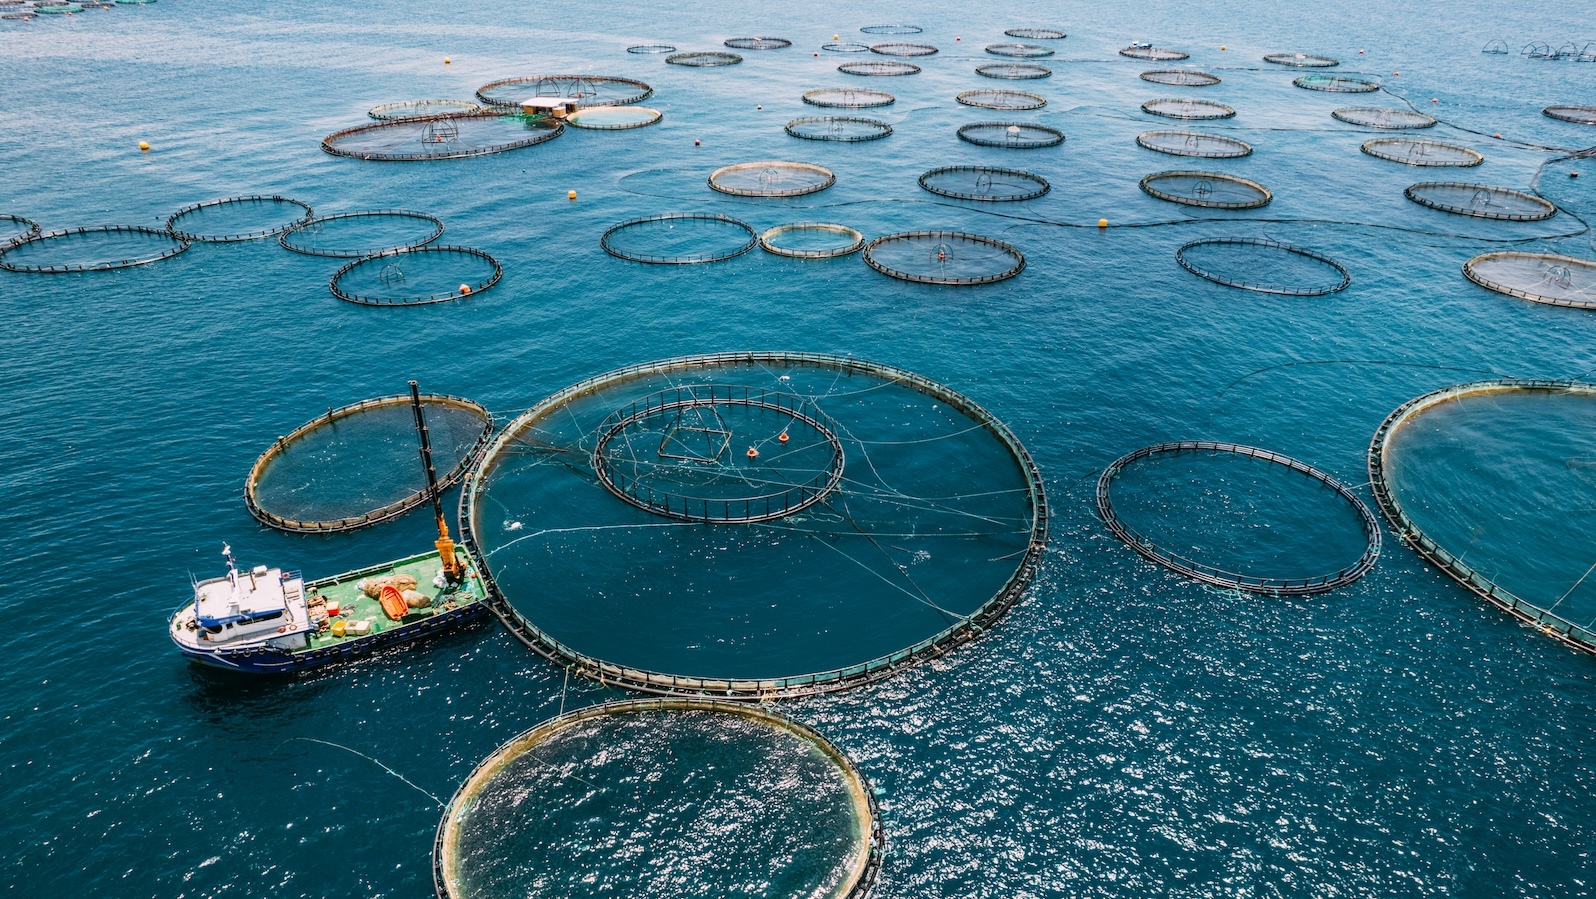 The world is farming more seafood than it catches. Is that a good thing?